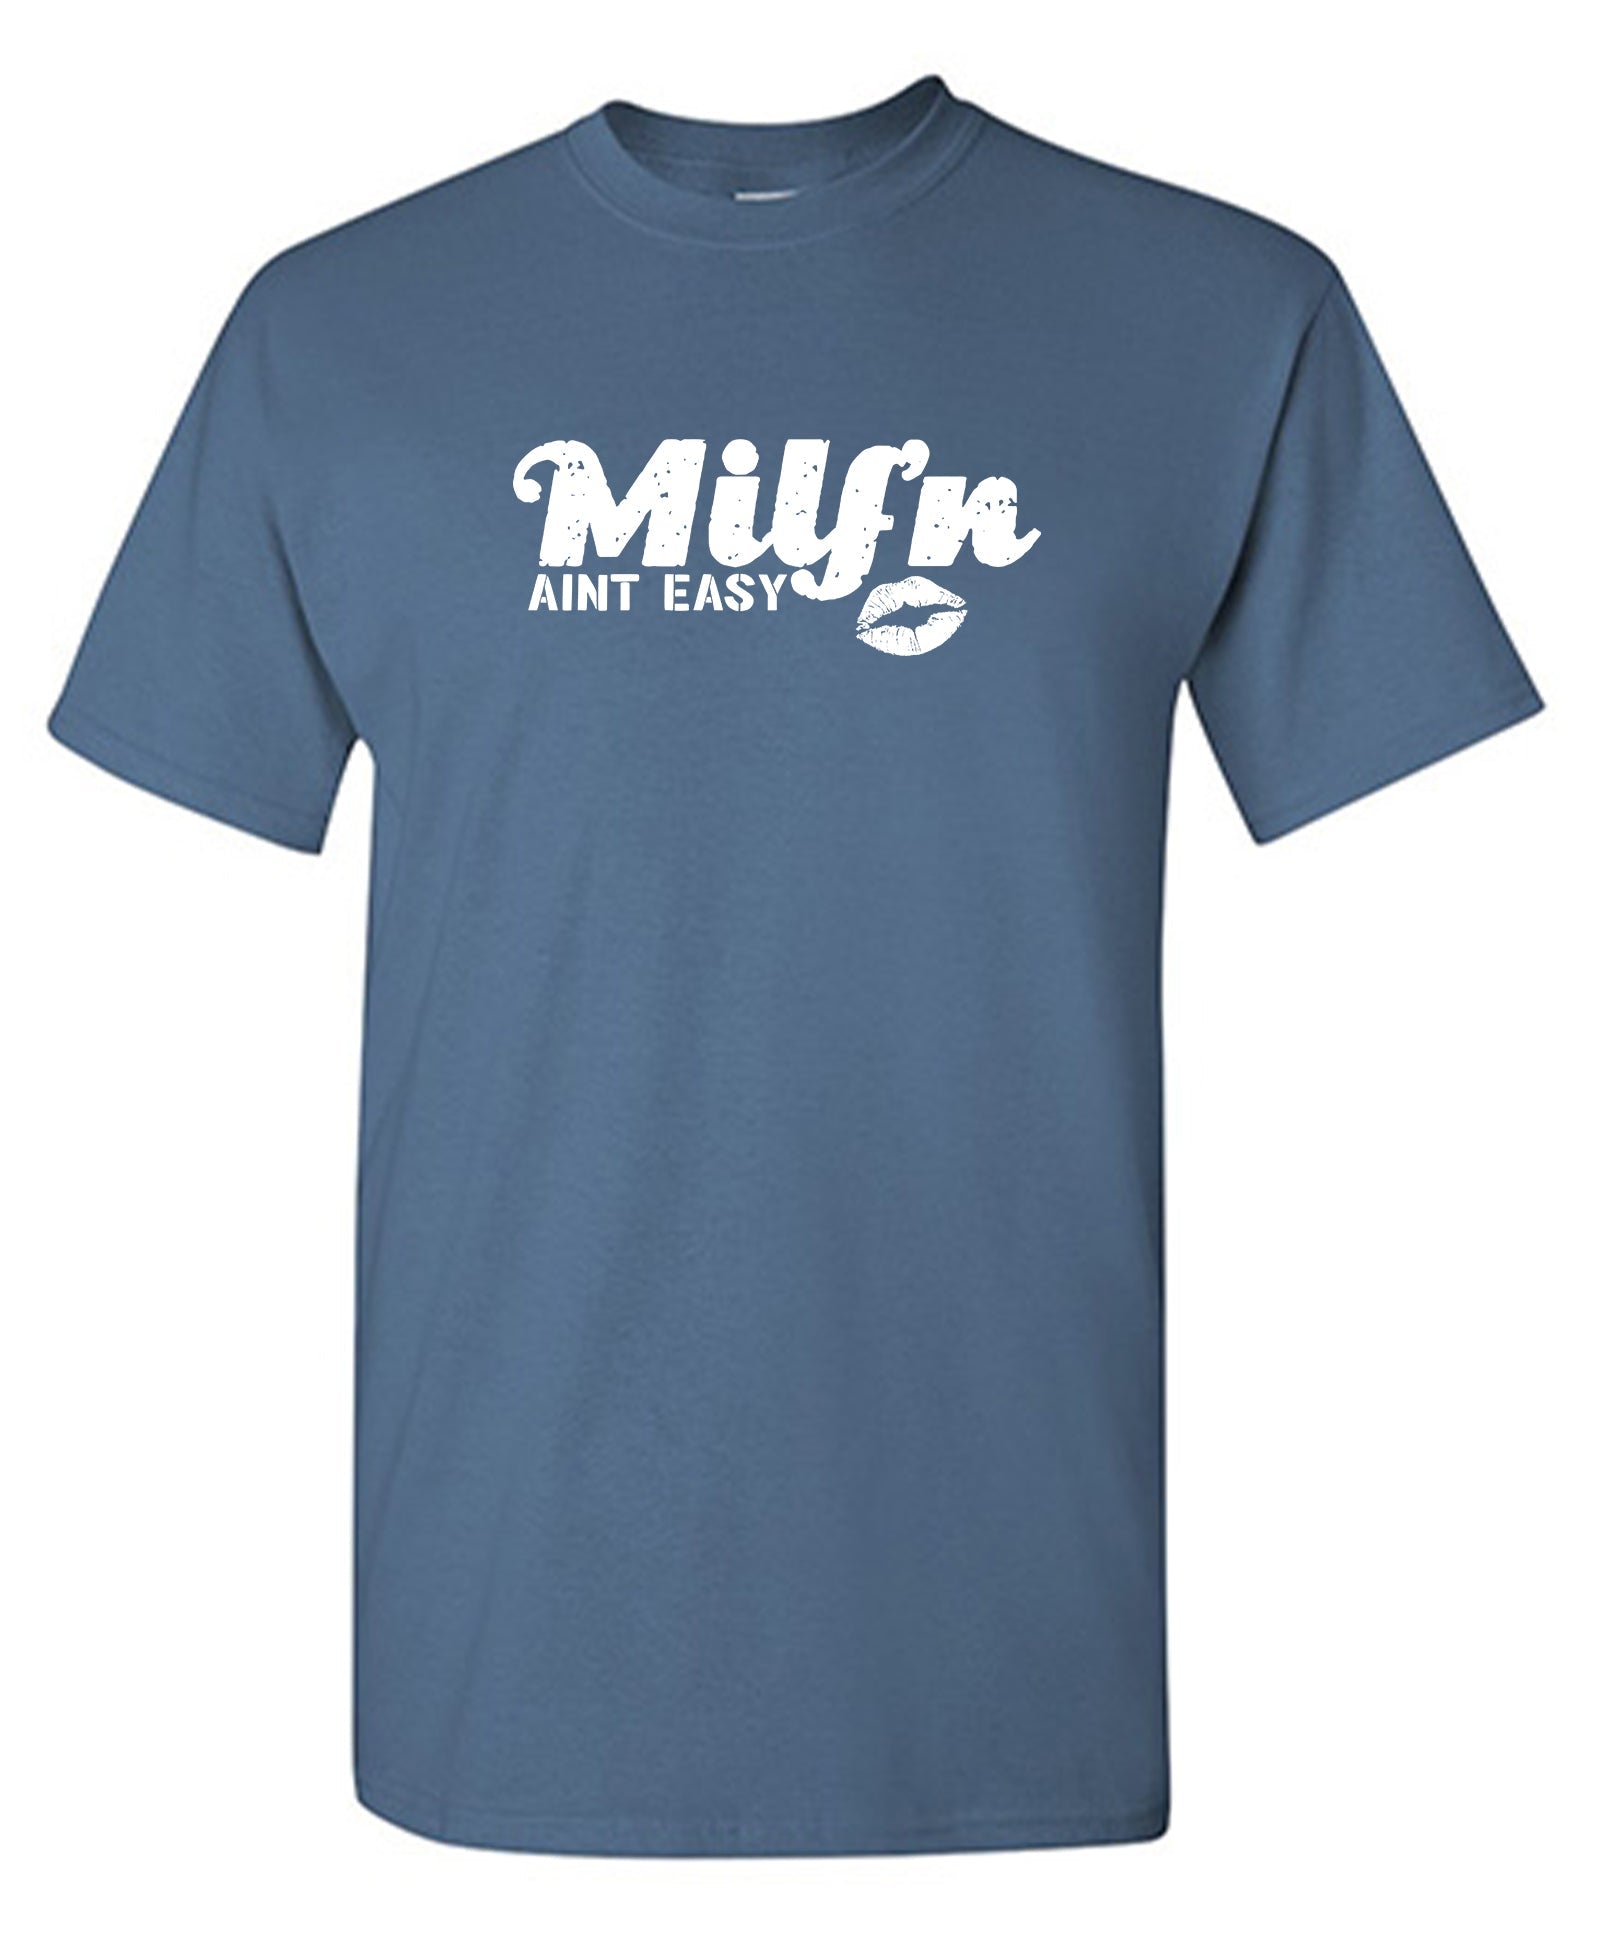 Milf'n Ain't Easy - Funny T Shirts & Graphic Tees